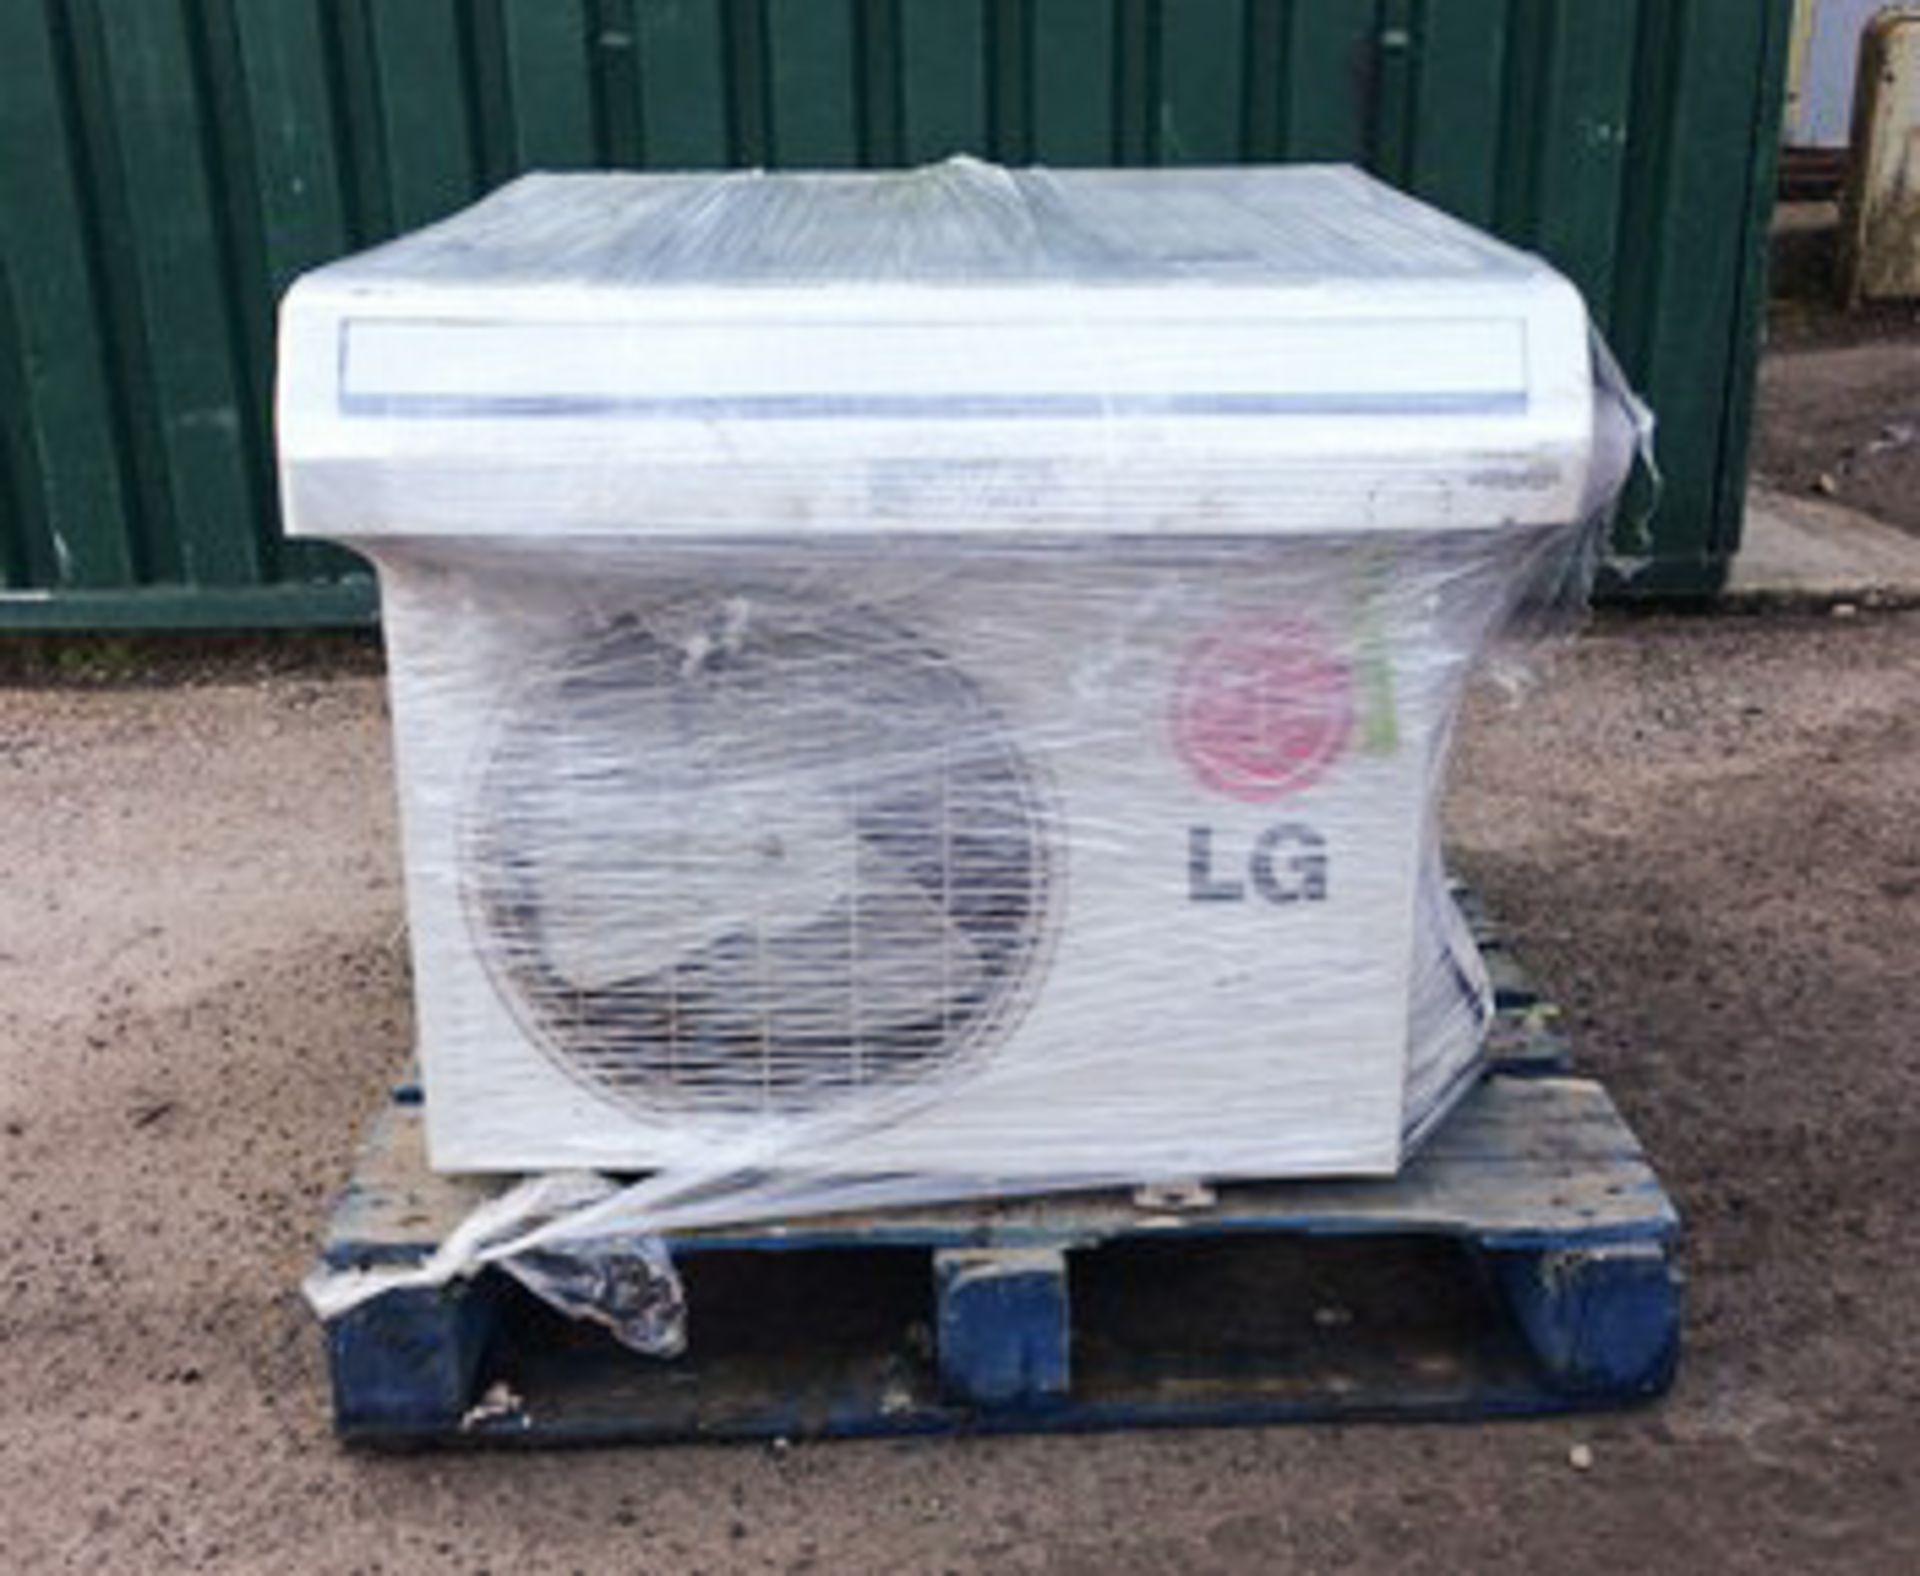 4 X LG AIR CONDITIONING UNITS** SOLD FROM & LOCATED AT BALLACHULISH PH49 4JQ VIEWING BY APPOINTMENT - Image 4 of 6